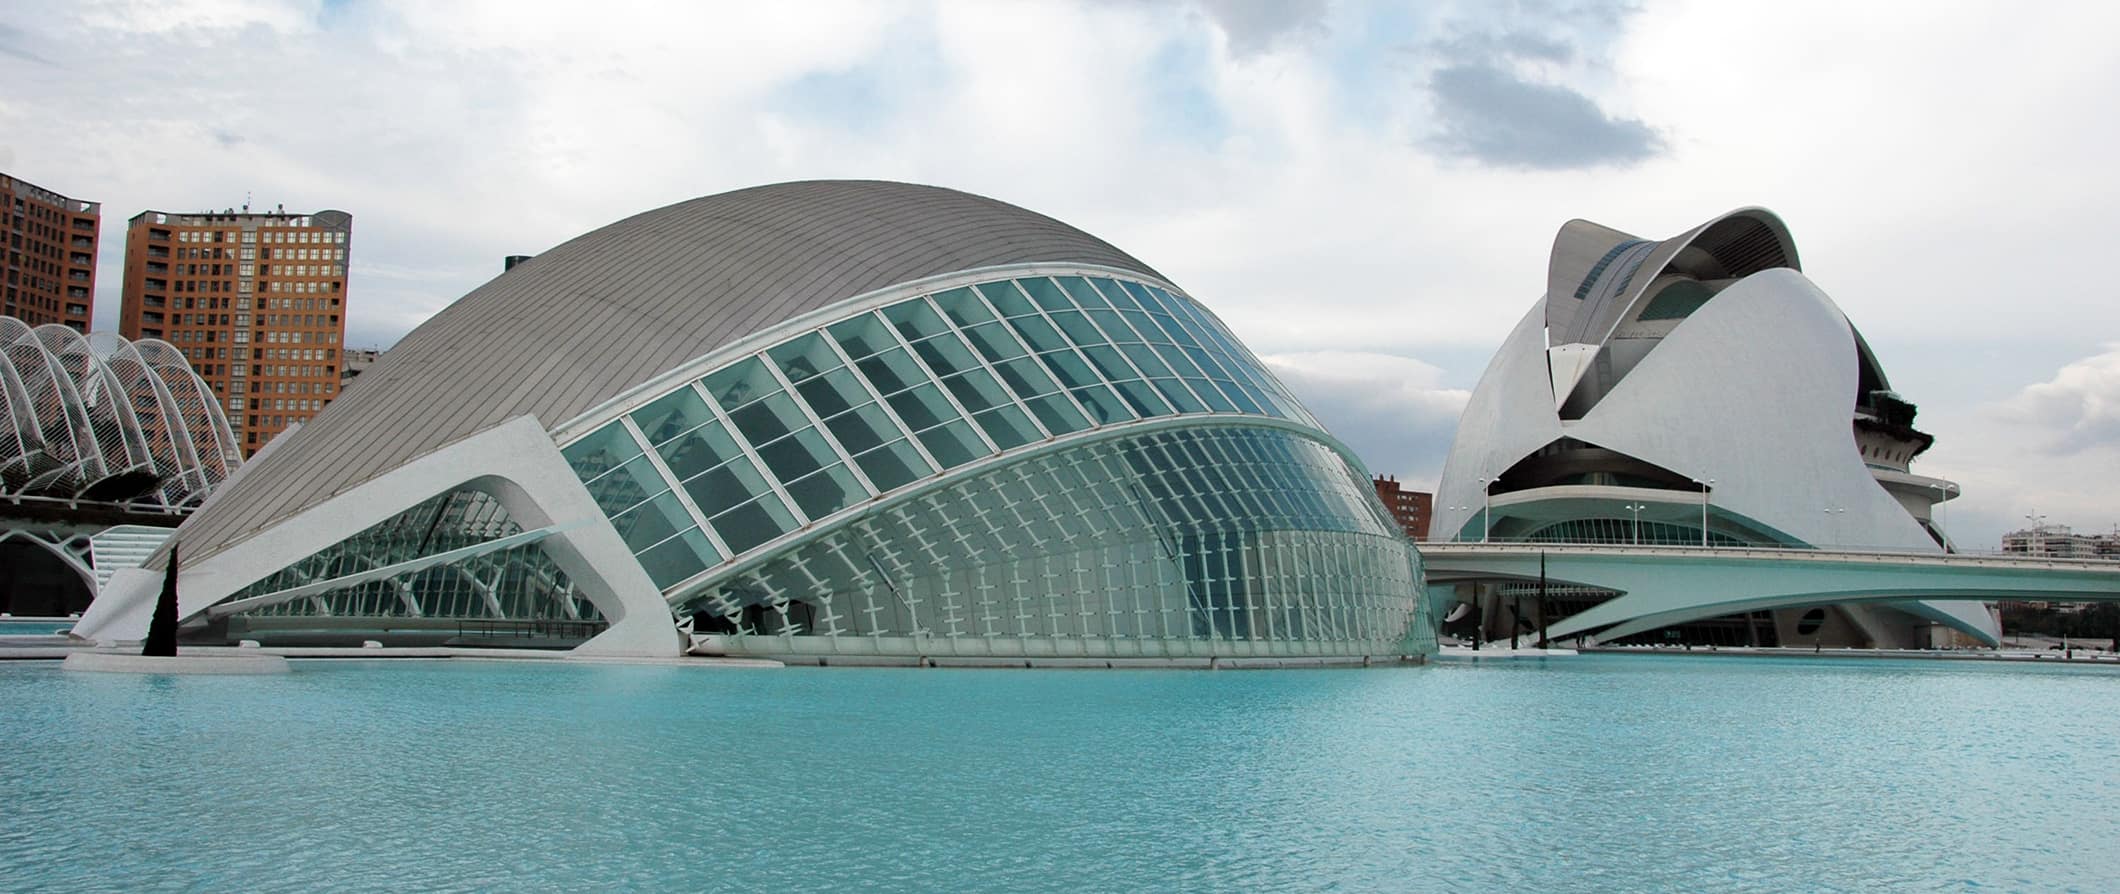 The iconic and modern architecture of Valencia, Spain